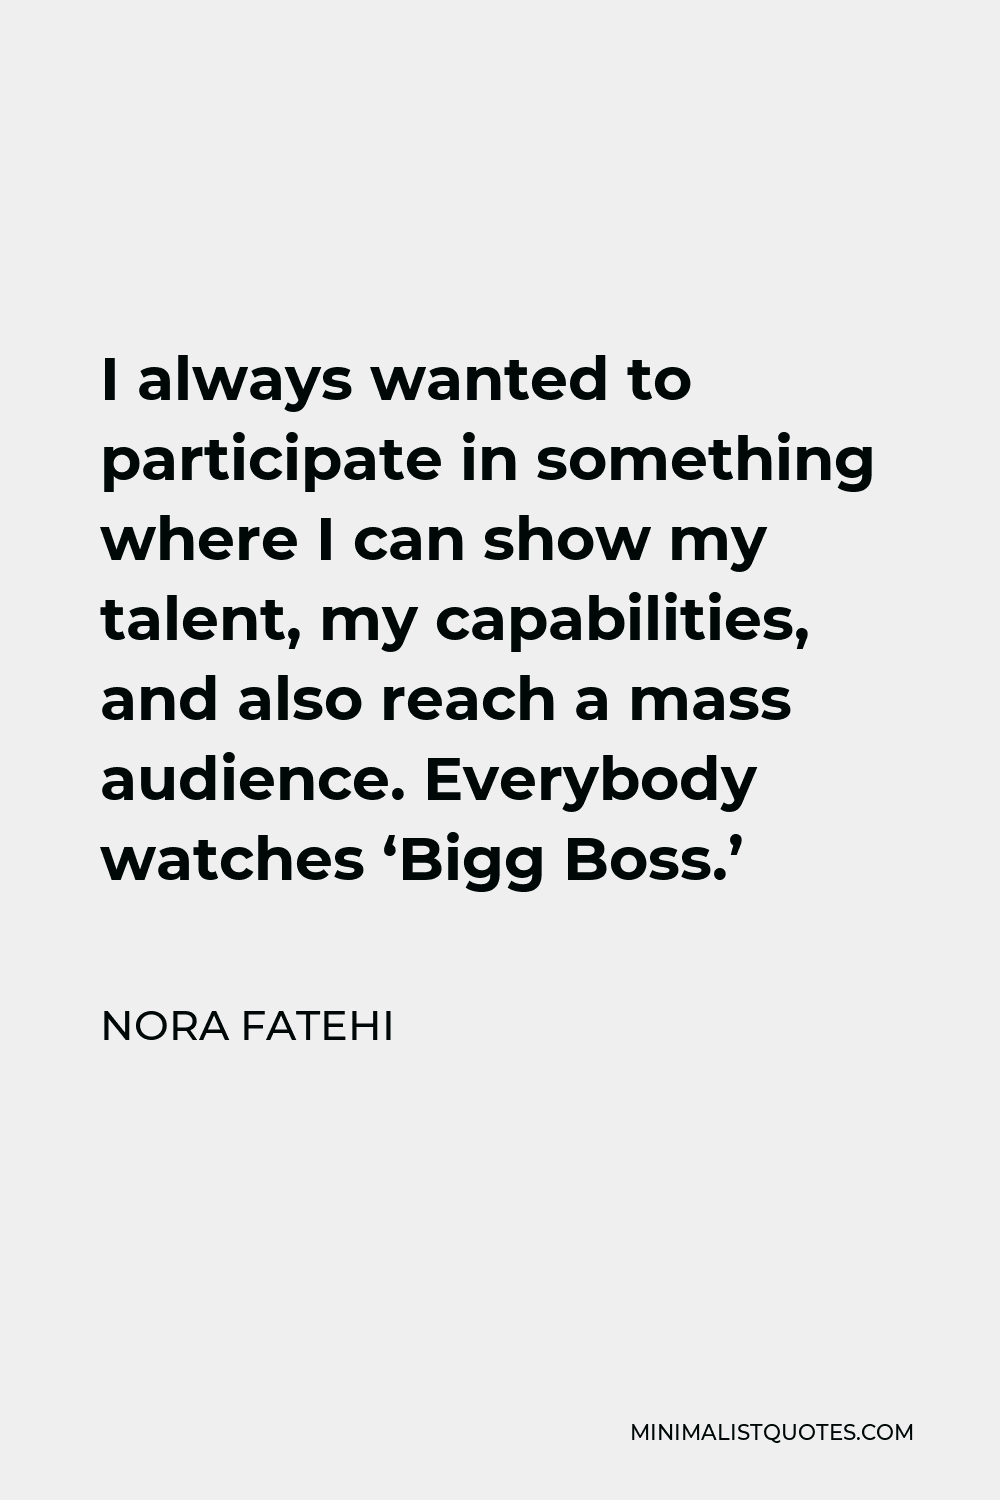 Nora Fatehi Quote - I always wanted to participate in something where I can show my talent, my capabilities, and also reach a mass audience. Everybody watches ‘Bigg Boss.’